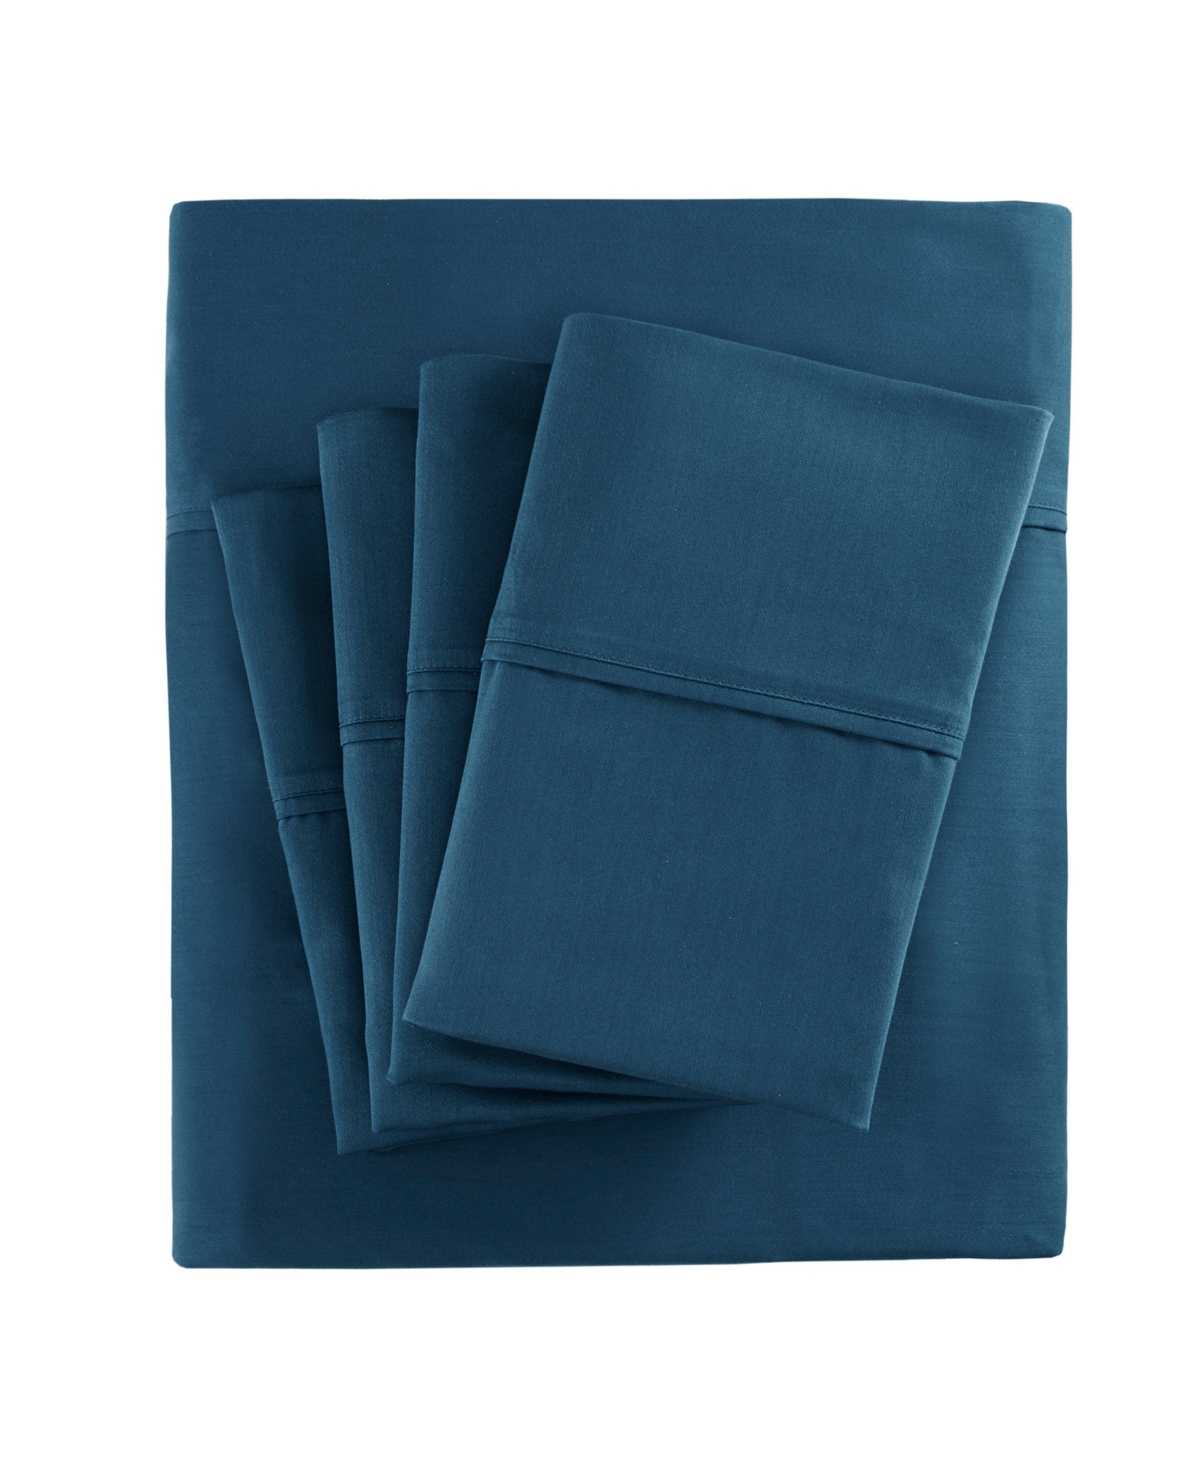 Madison Park 800 Thread Count Cotton Blend Sateen 6-pc. Sheet Set, Queen Bedding In Teal